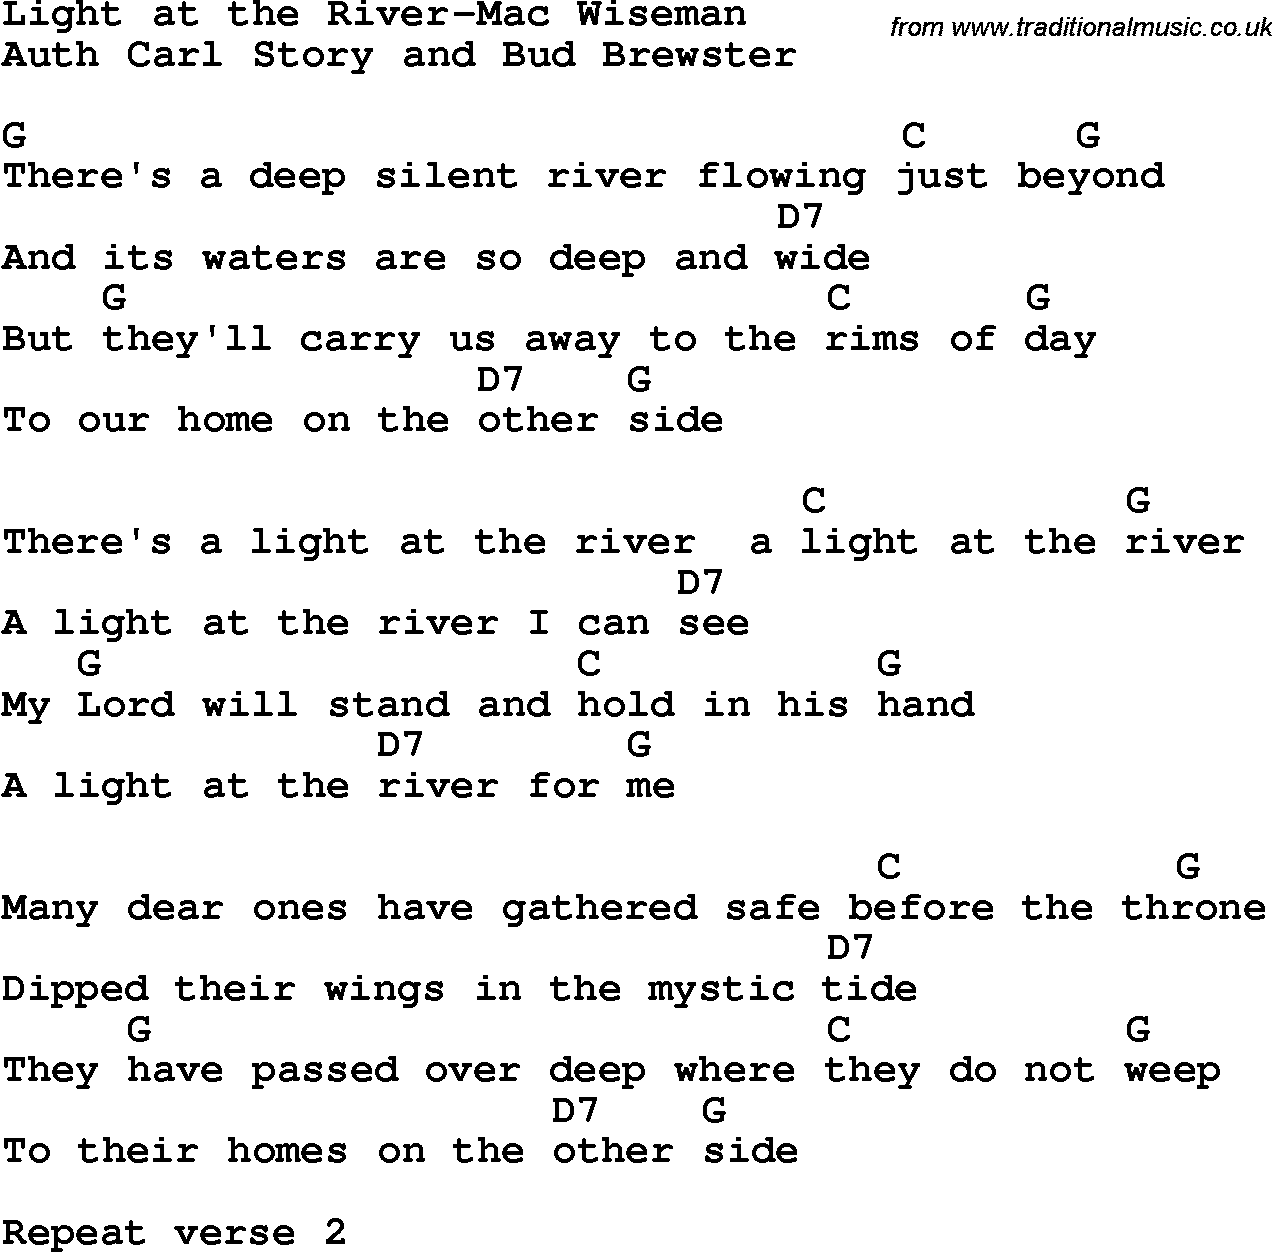 Country, Southern and Bluegrass Gospel Song Light at the River-Mac Wiseman lyrics and chords